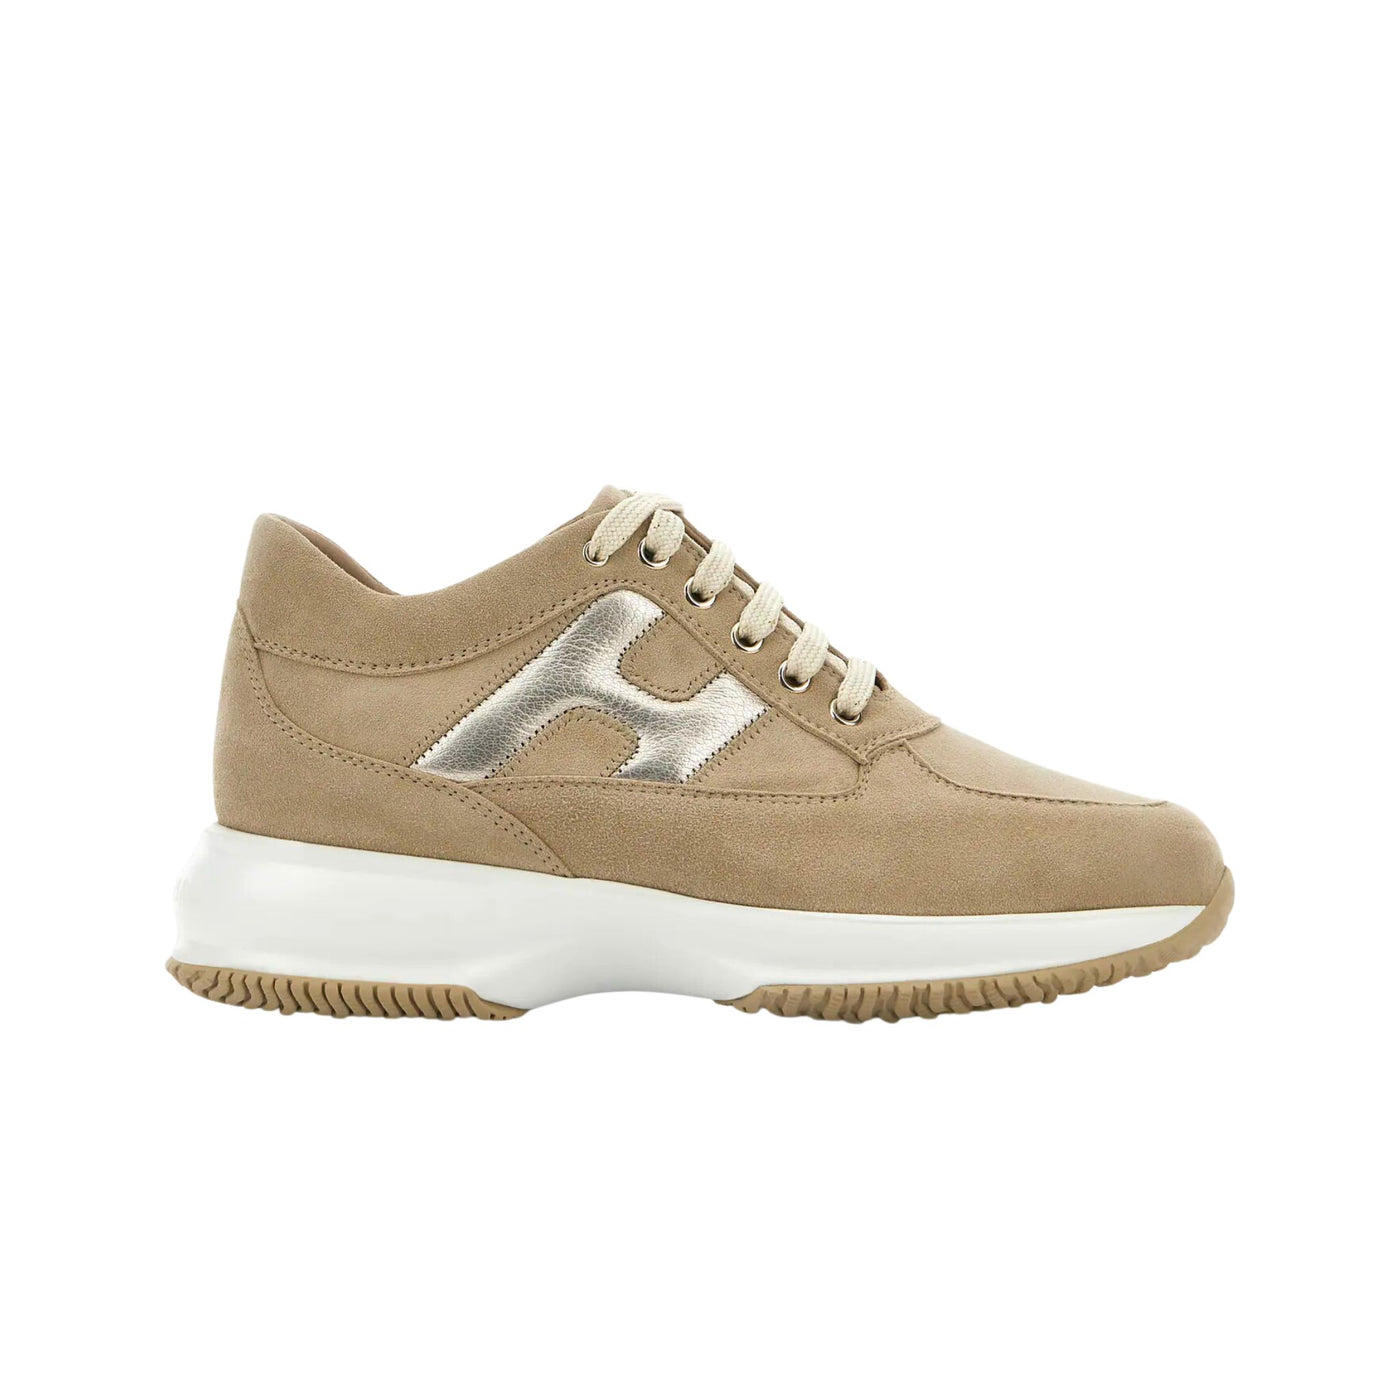 Women's suede shoe with silver logo